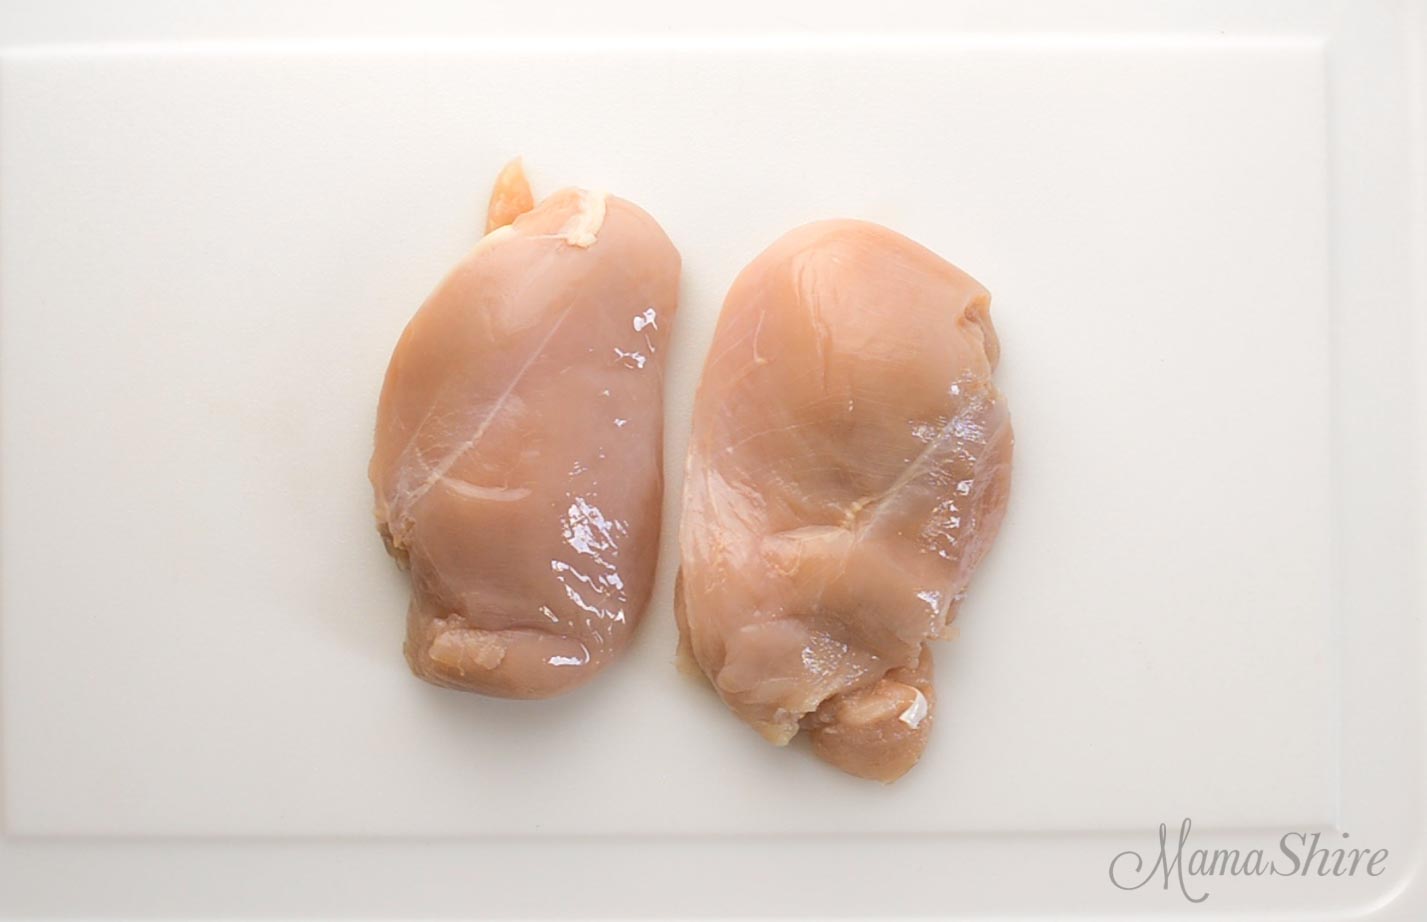 1 lb of chicken breasts for chicken nuggets